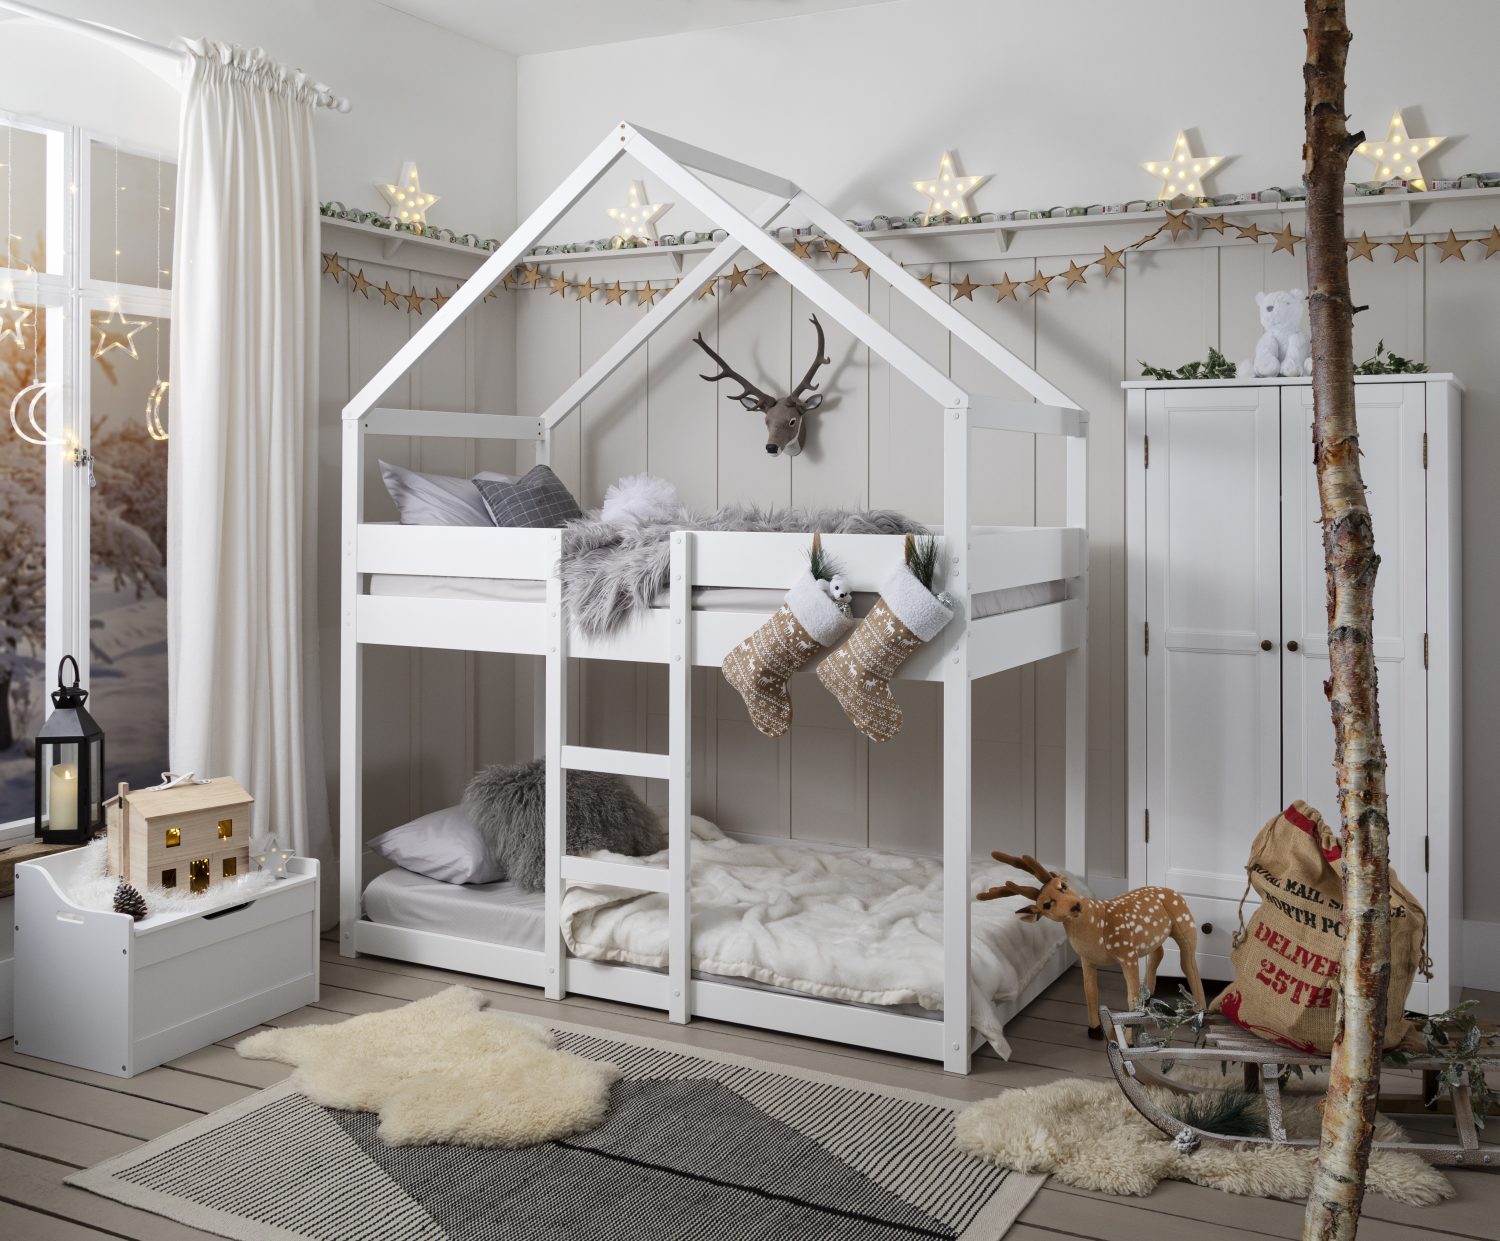 How to transform your child’s bedroom into a winter wonderland